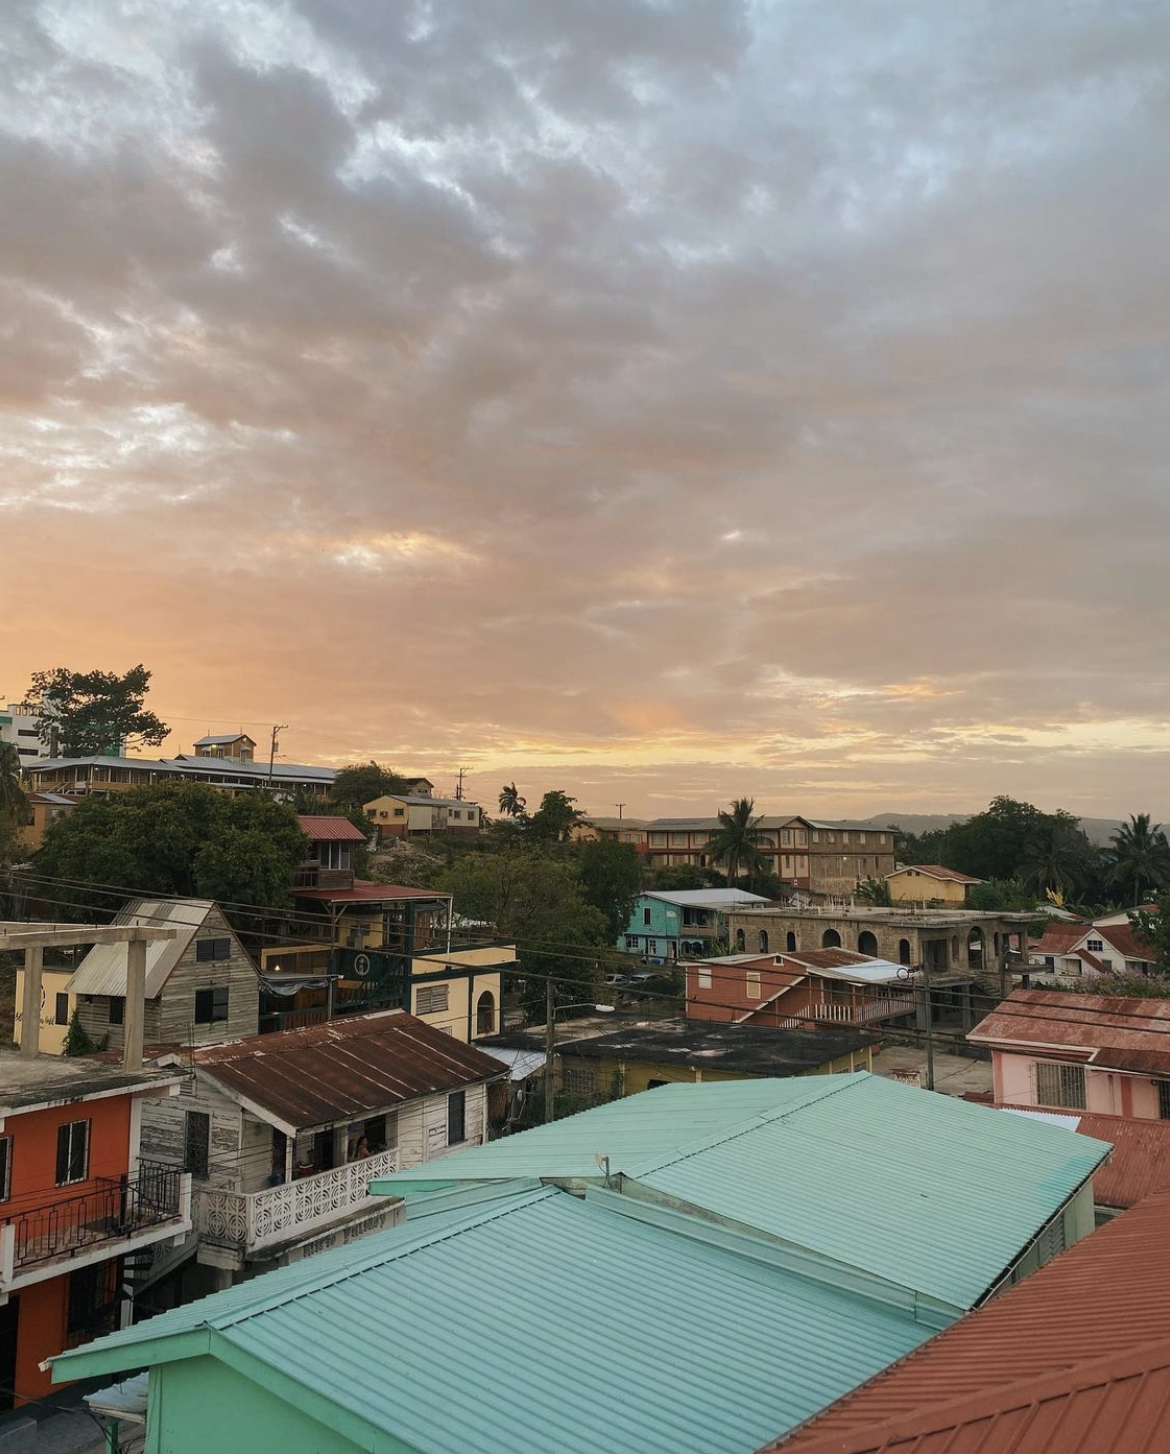 Rooftop view of Belize at sunset